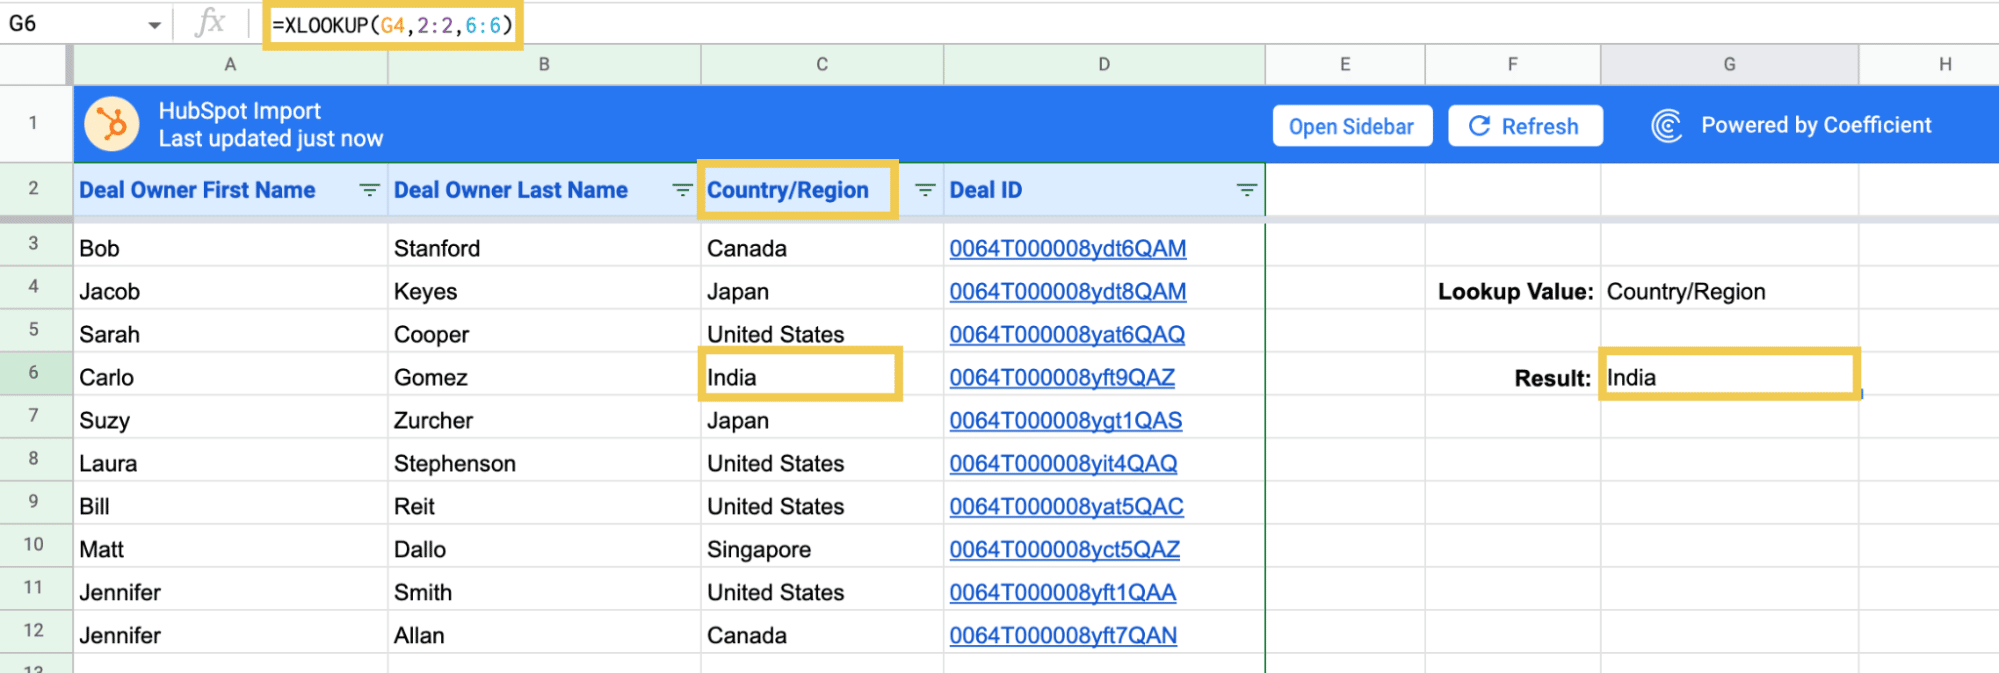 xlookup value by row